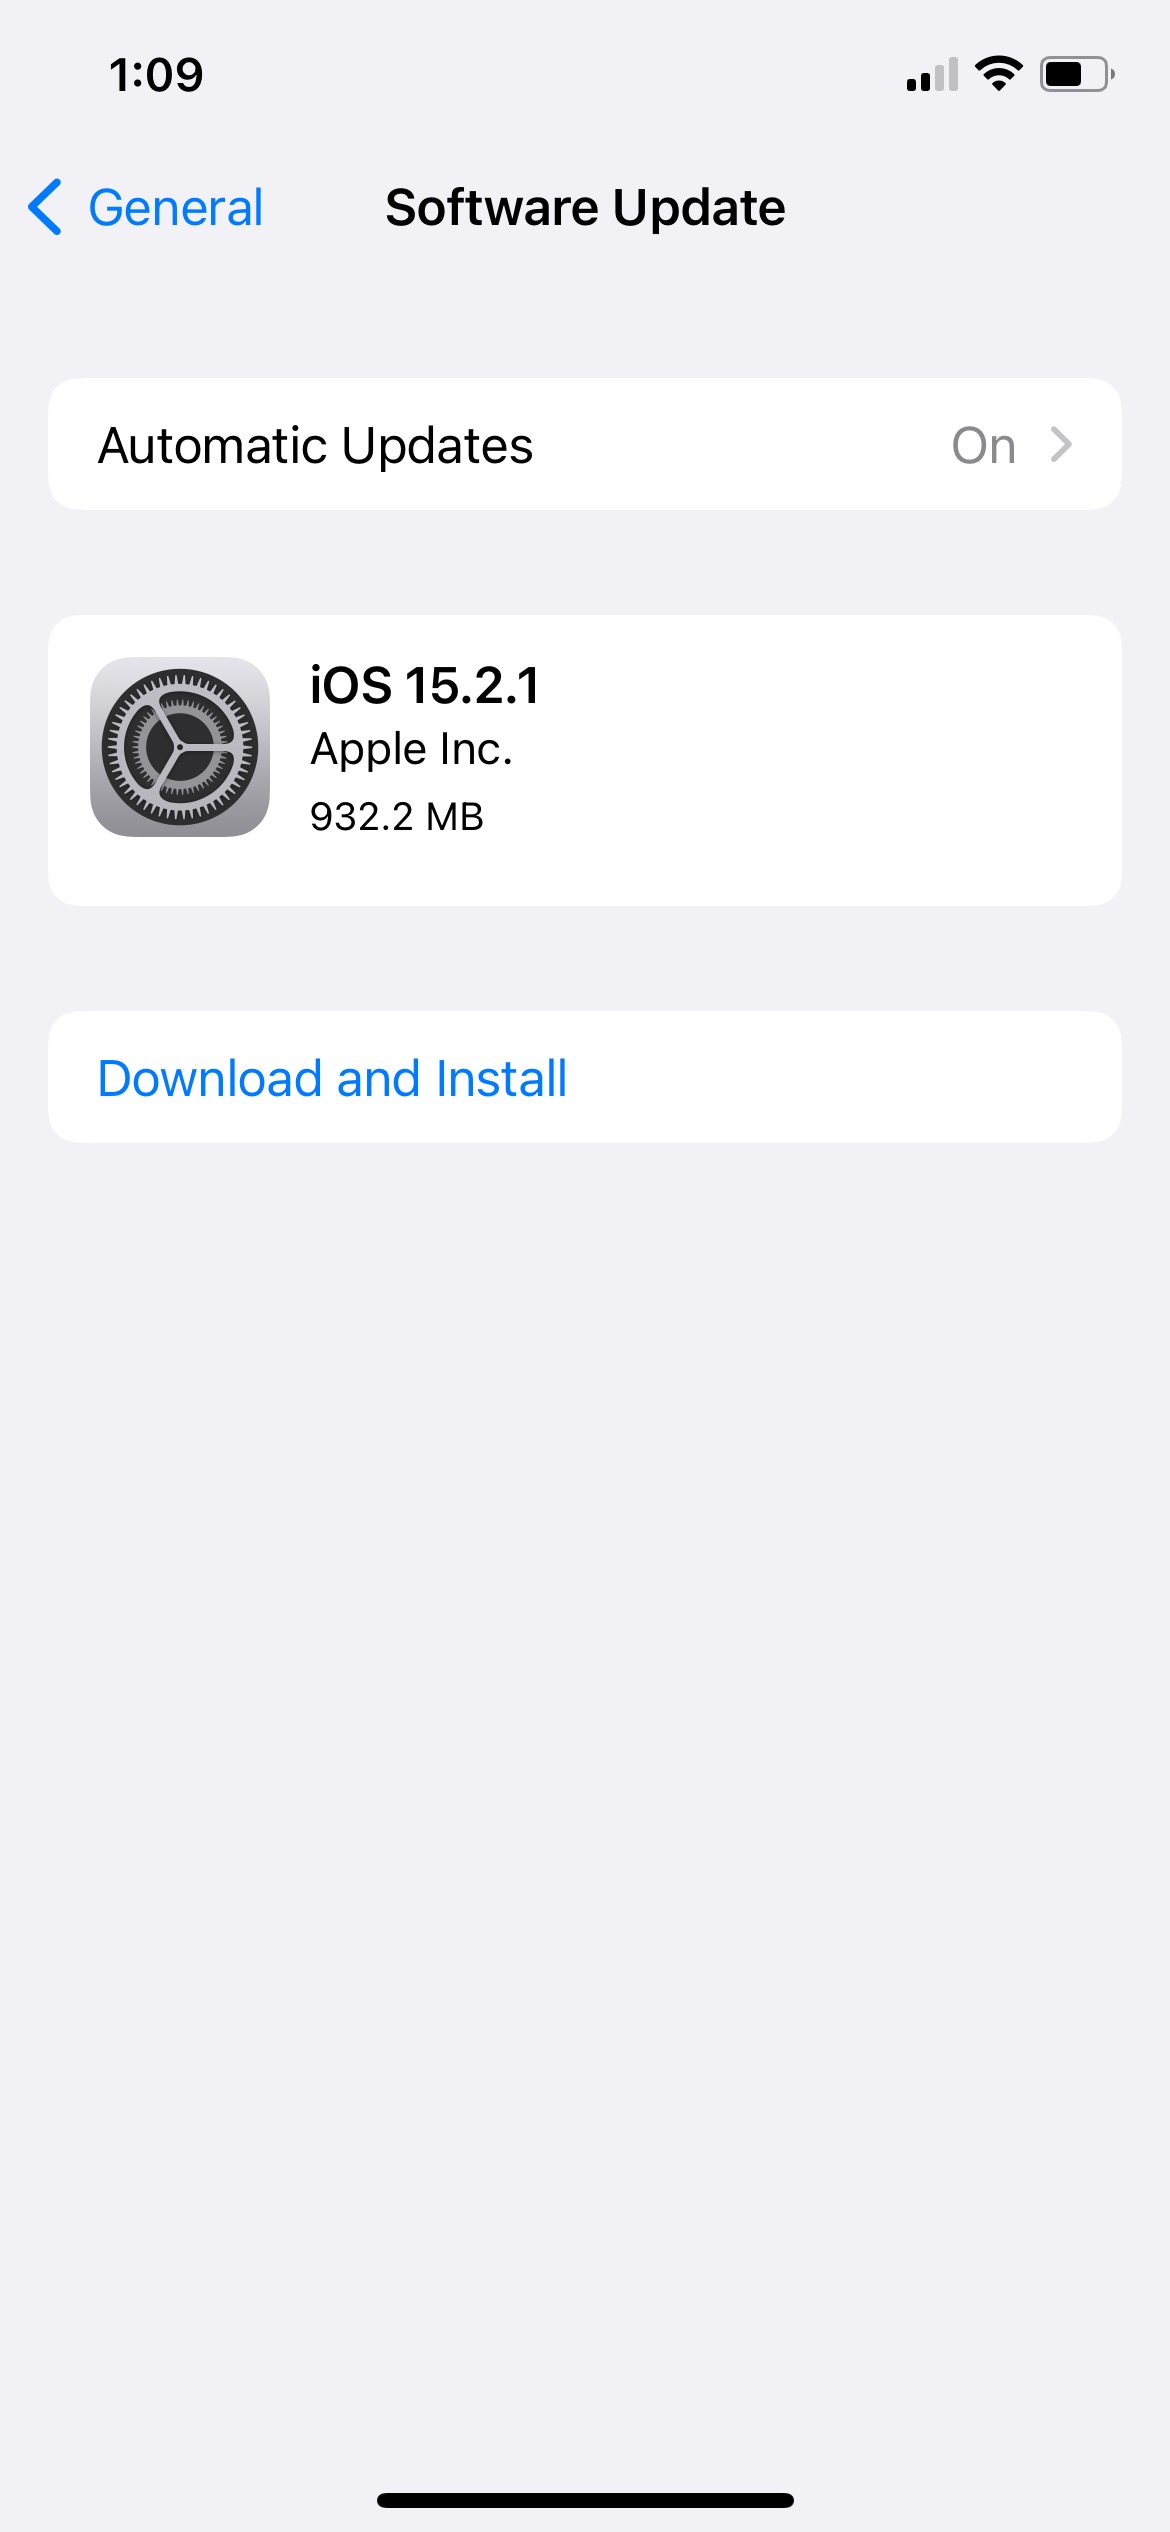 Apple Releases iOS 15.3 Beta 2 and iPadOS 15.3 Beta 2 [Download]